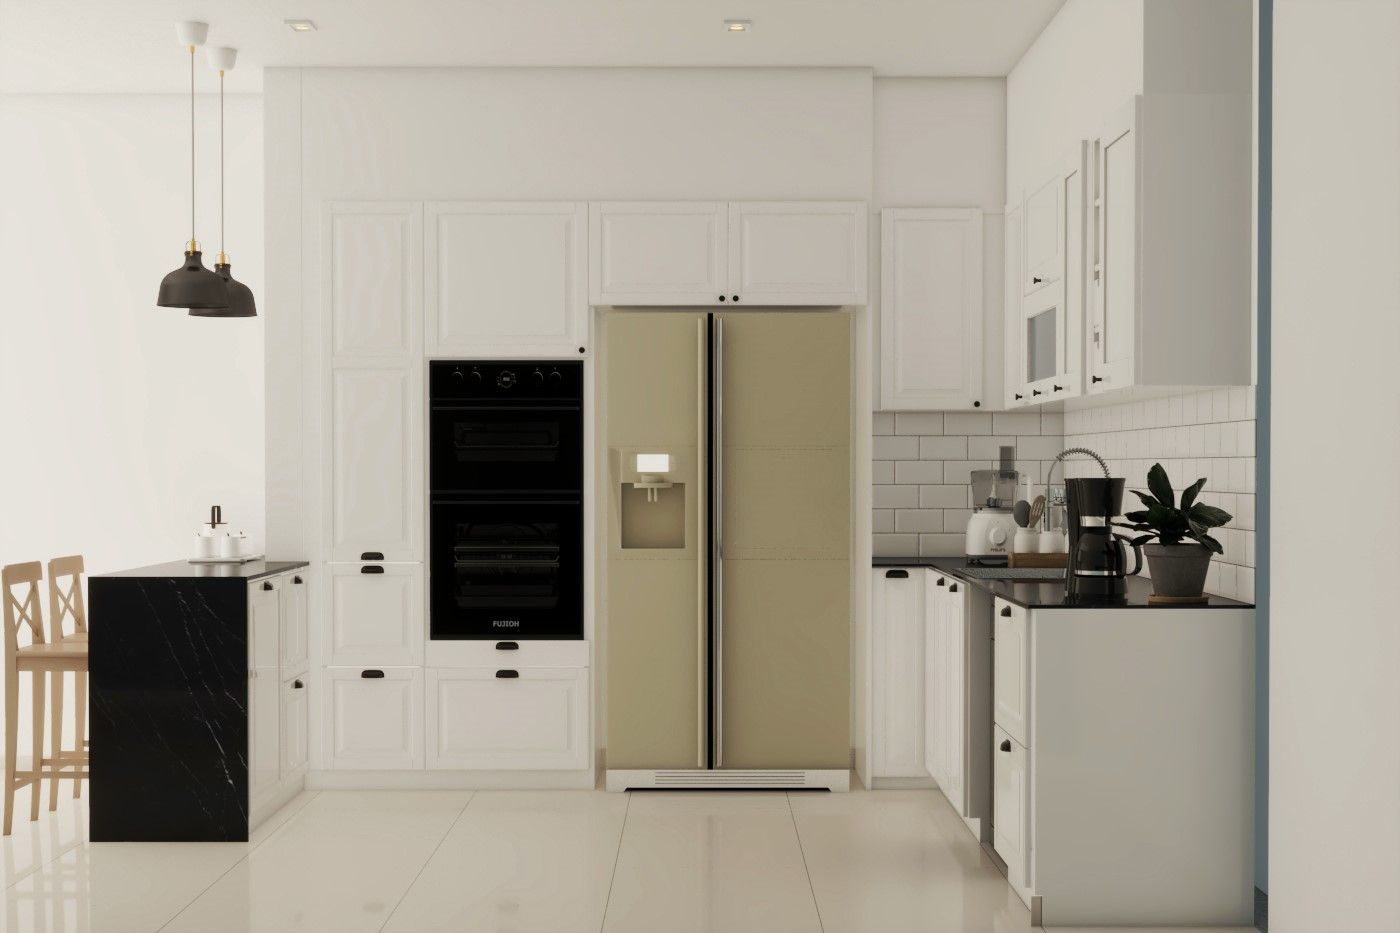 Contemporary L-Shaped Kitchen Cabinet Design With White Interiors